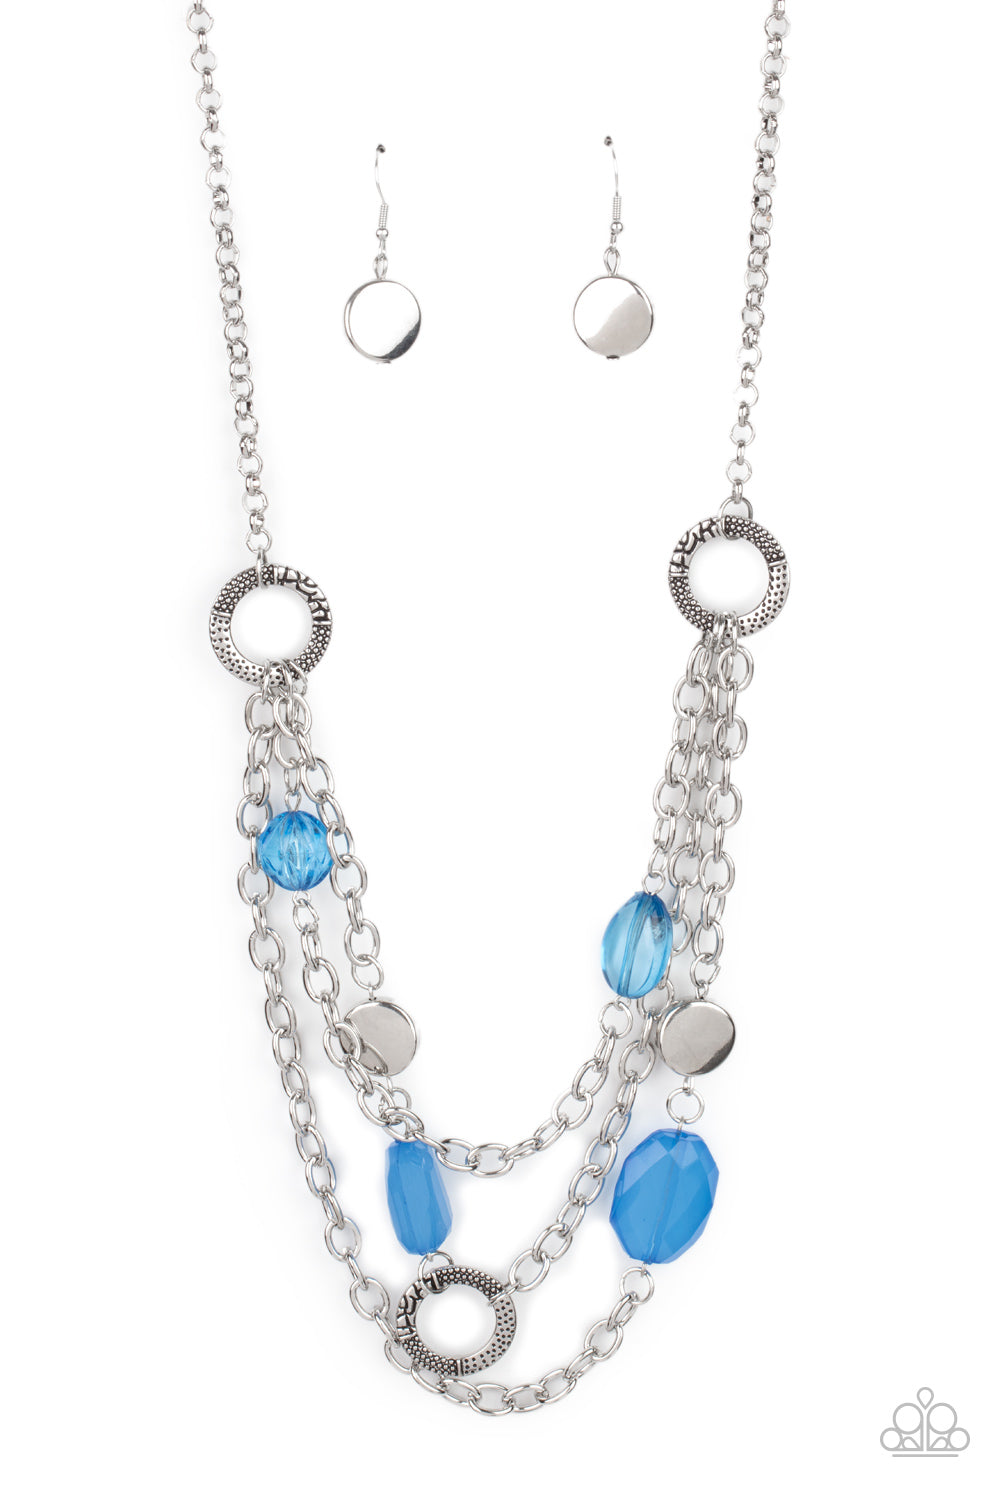 Paparazzi Accessories Oceanside Spa - Blue Necklaces - Lady T Accessories